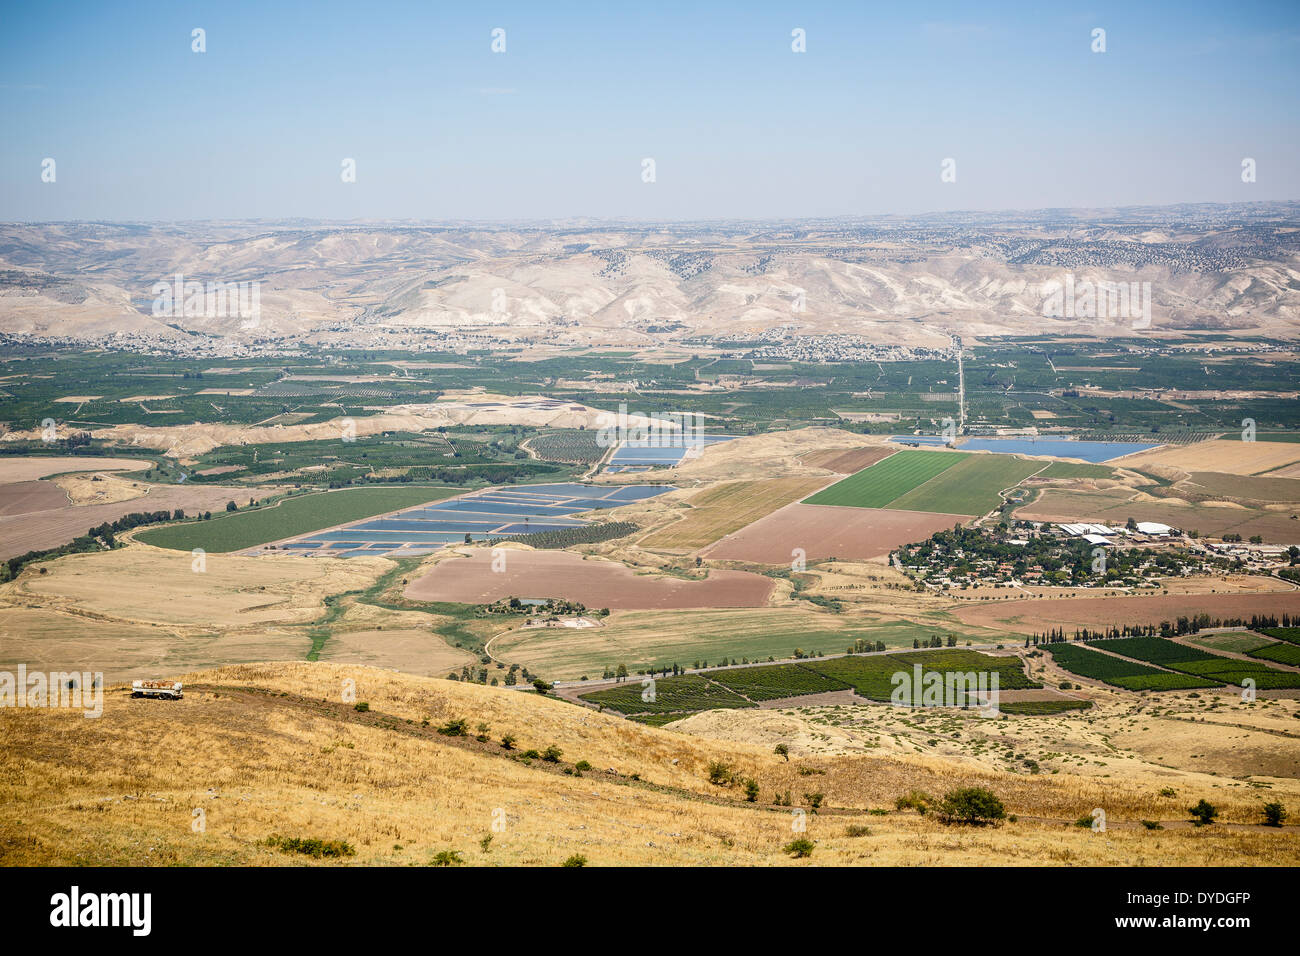 View over the Jordan Valley seen from the Belvoir crusader fortress, lower Galilee region, Israel. Stock Photo